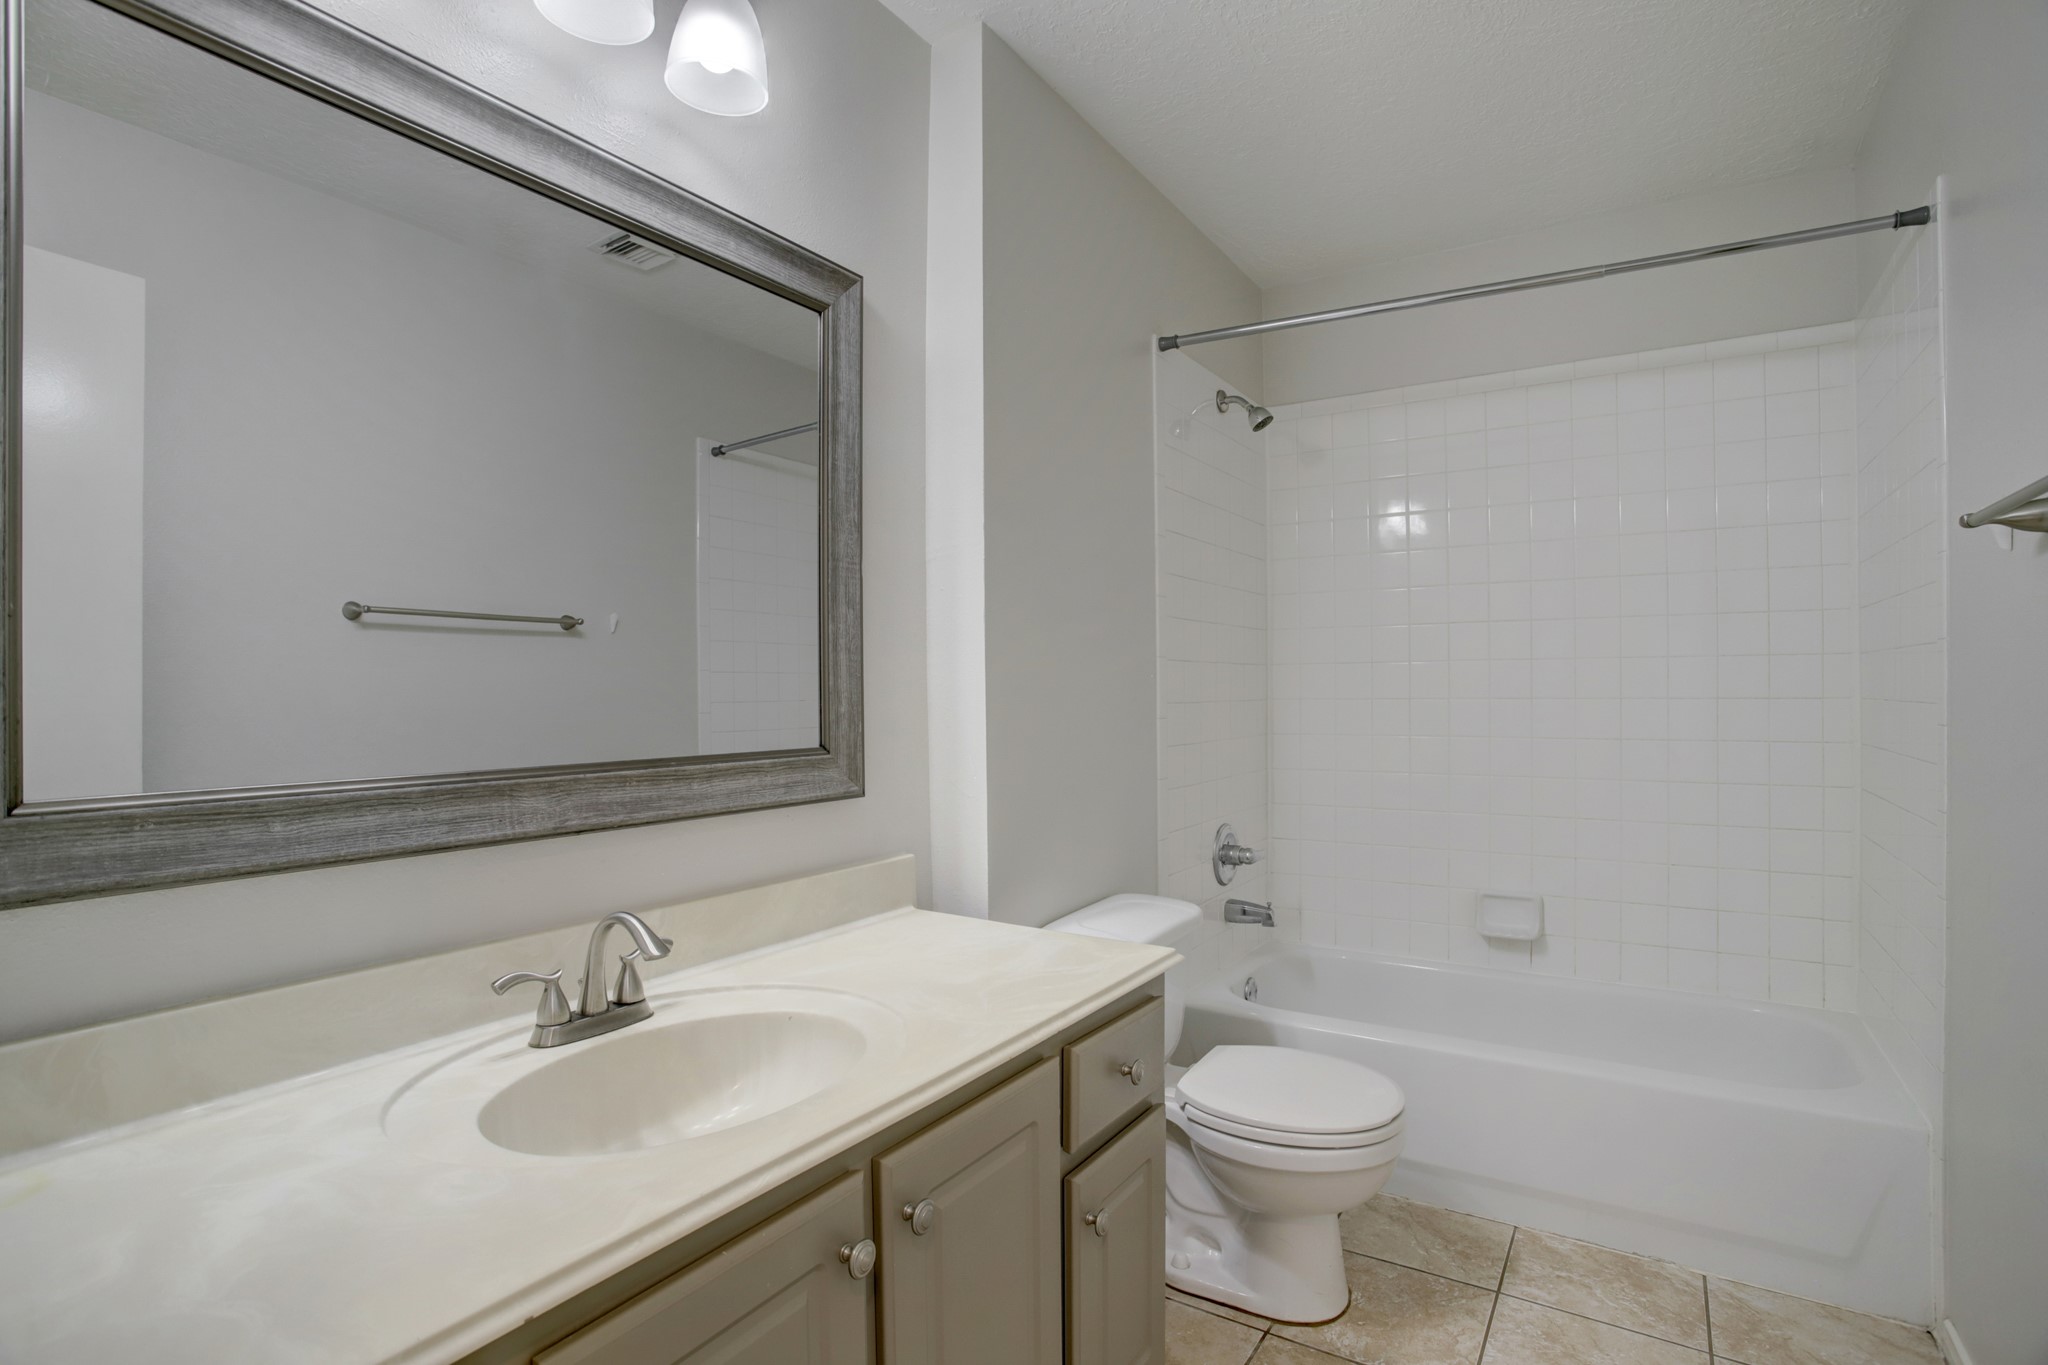 Generous renovated bath with great storage and tub with shower.